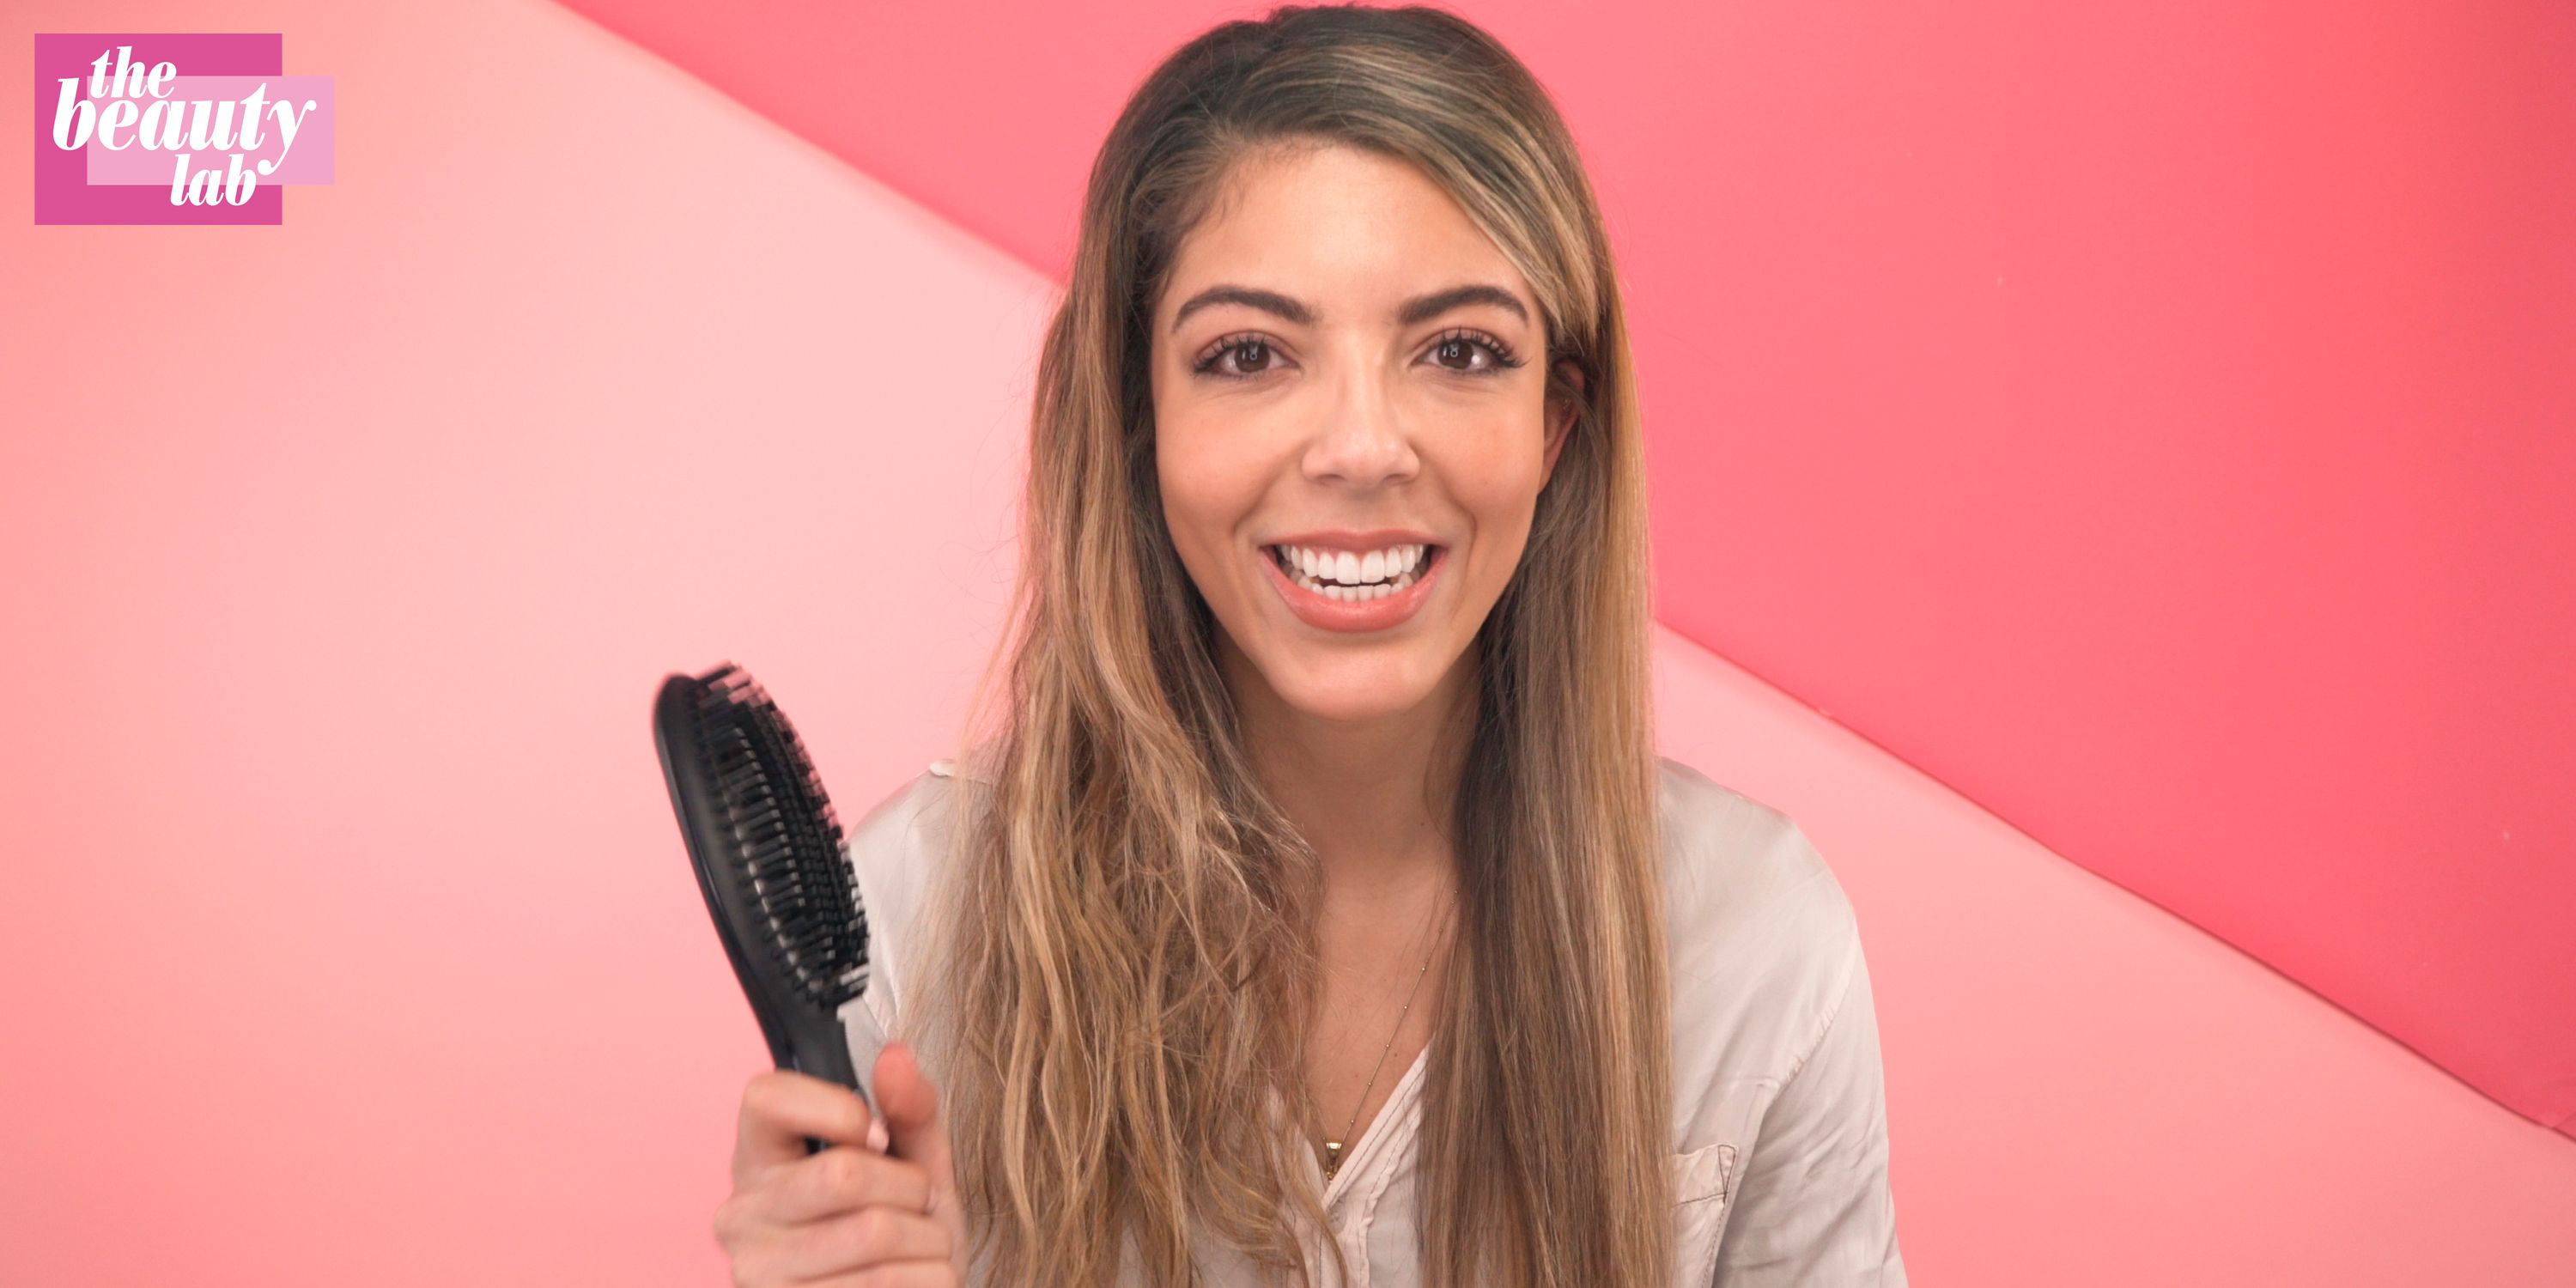 Ghd Glide Review: We tested the straightening brush on 3 hair types